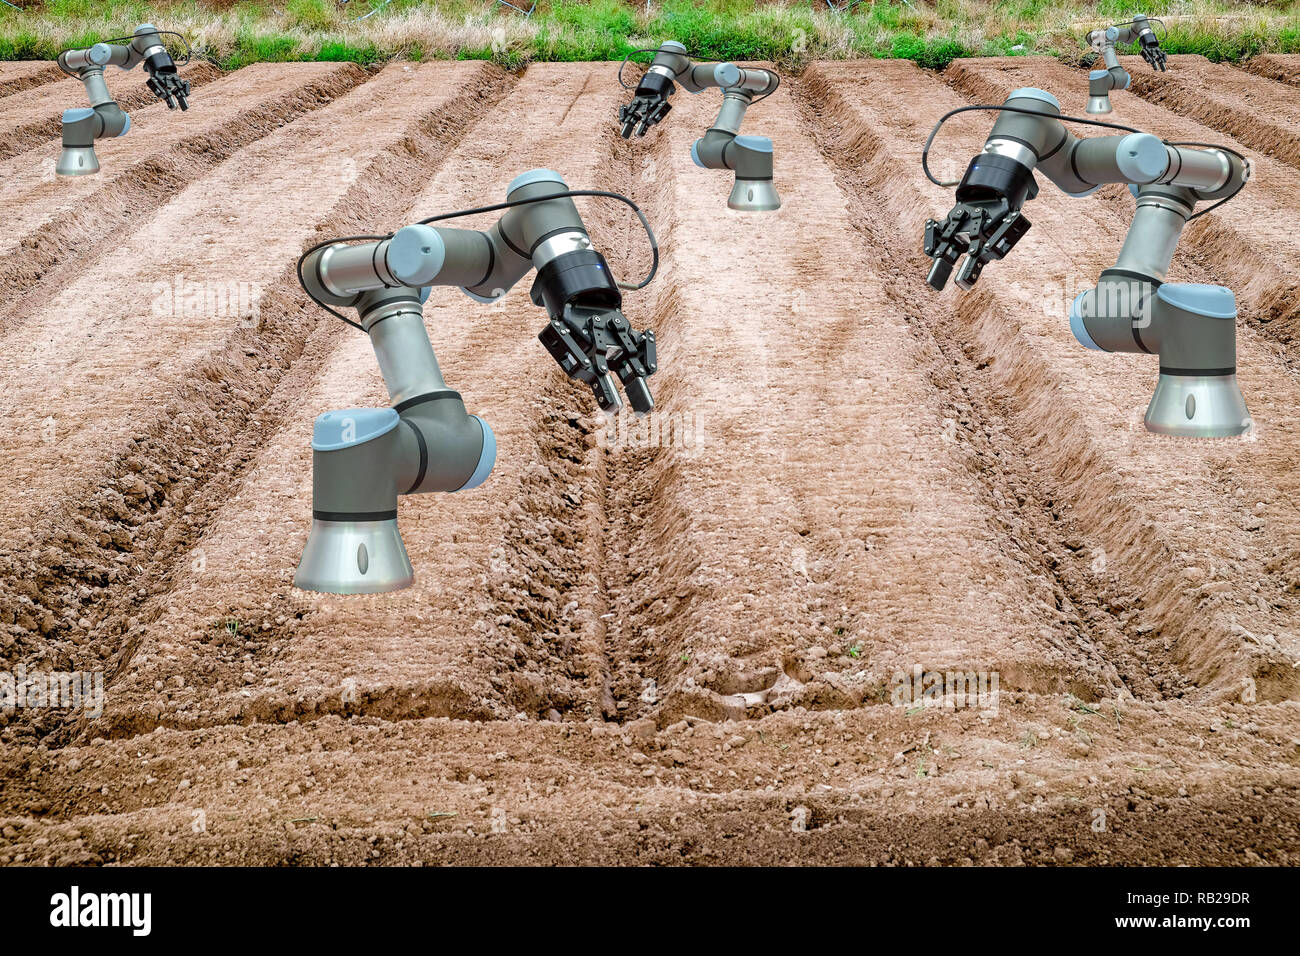 Land for agricultural preparation of farmer have installed a robot for assist farmer on working, smart farming 4.0 concept Stock Photo